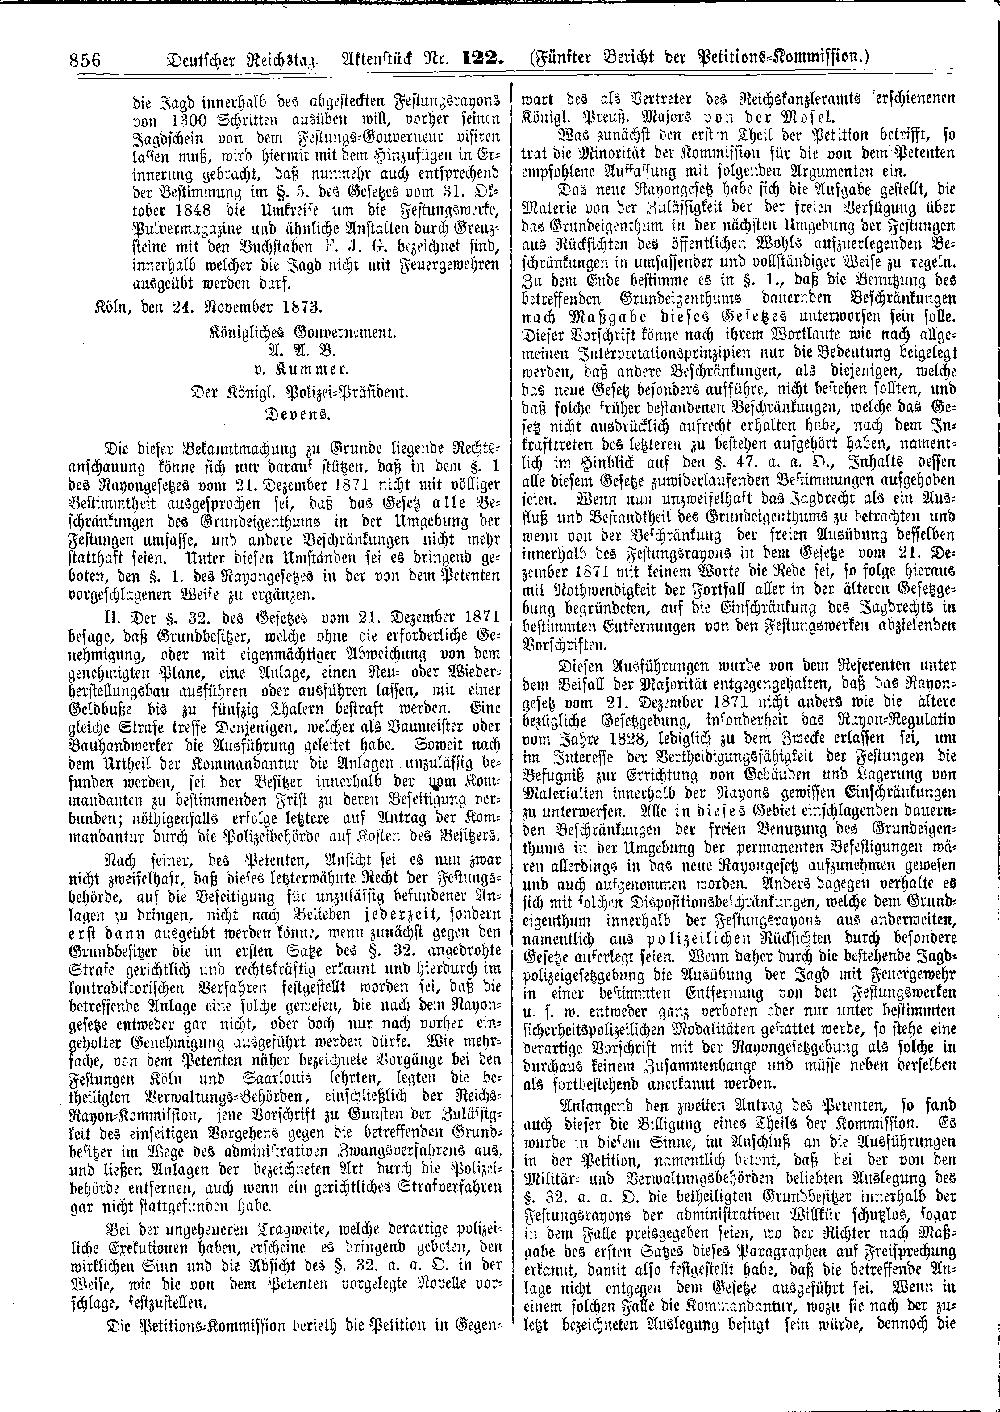 Scan of page 856